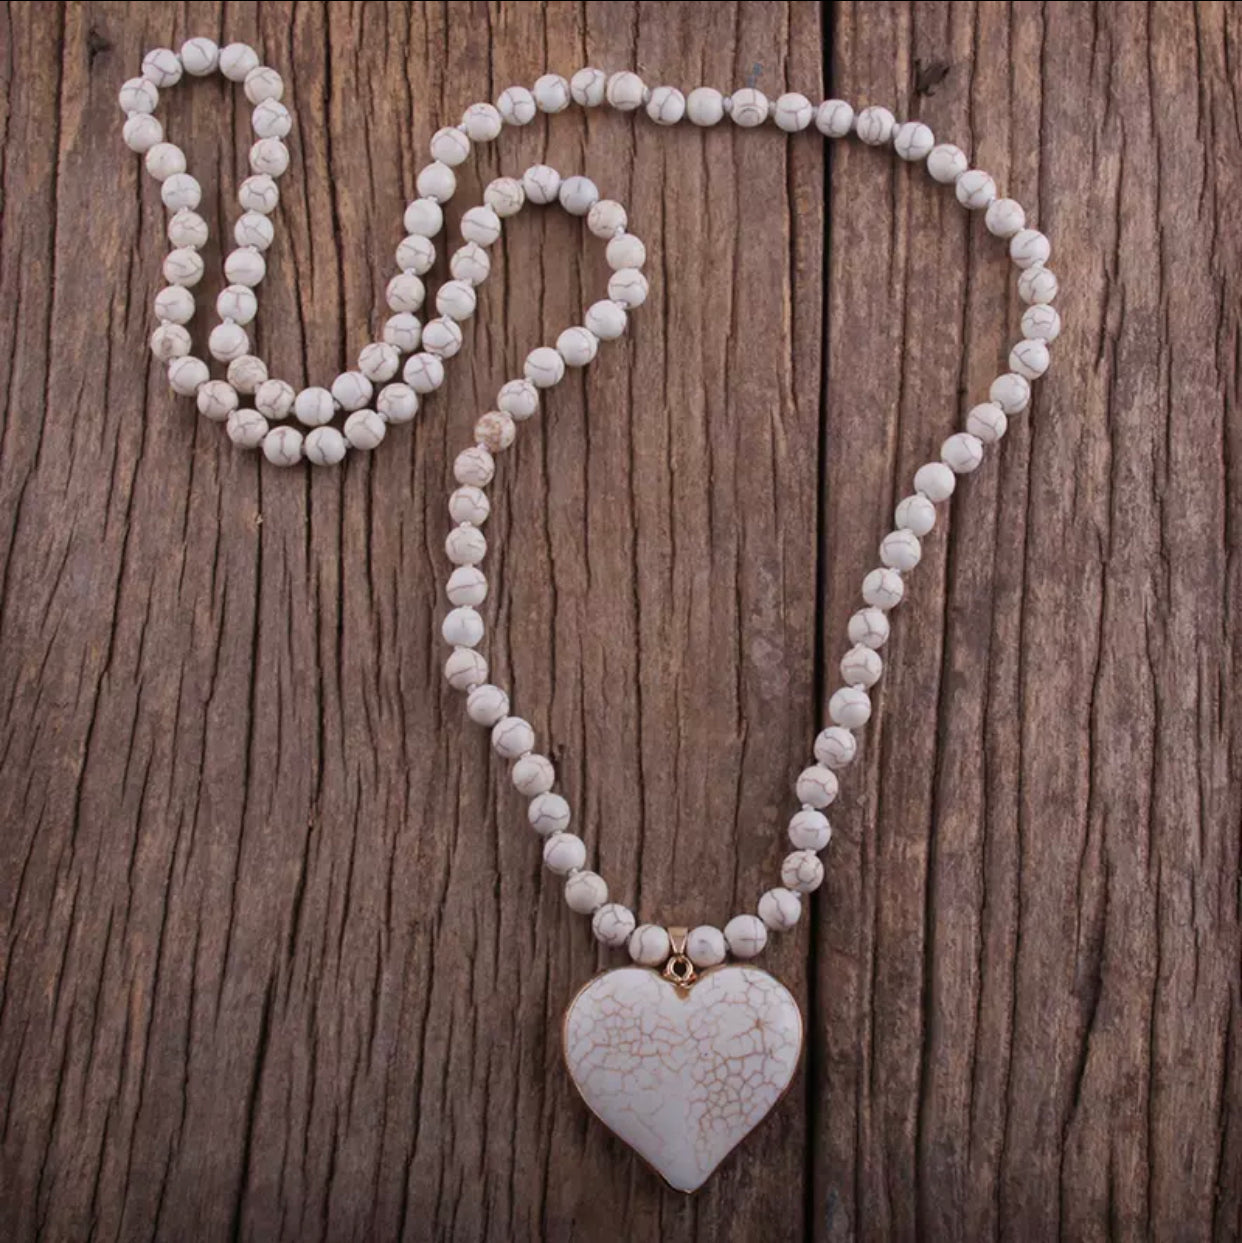 beads with genuine white stone heart pendant necklace